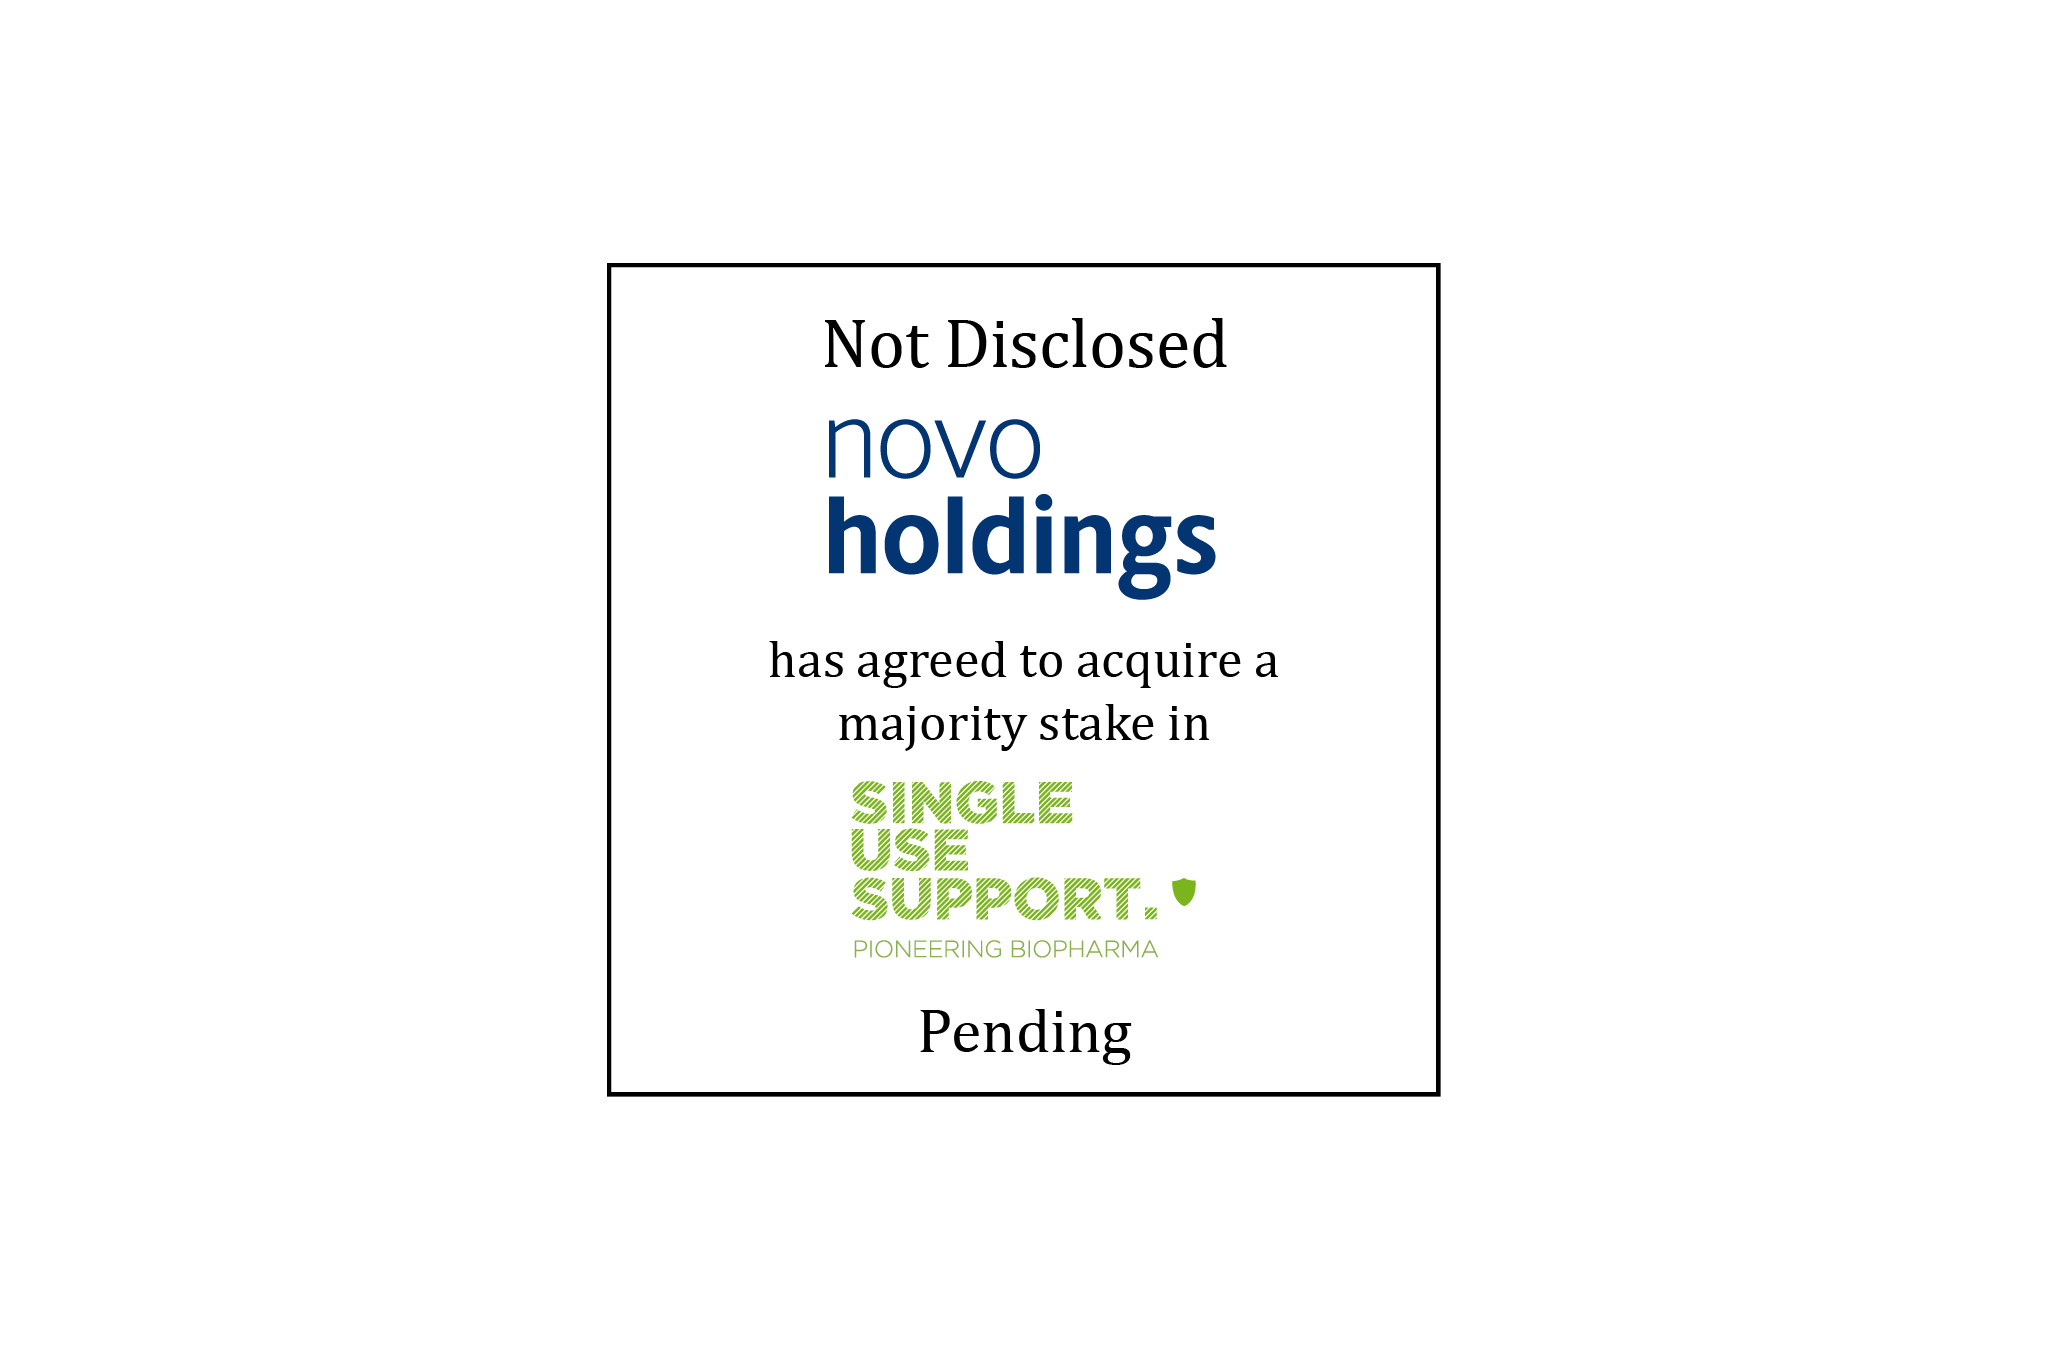 Value Not Disclosed | Novo Holdings (logo) has agreed to acquire a majority stake in Single Use Support (logo) | Pending